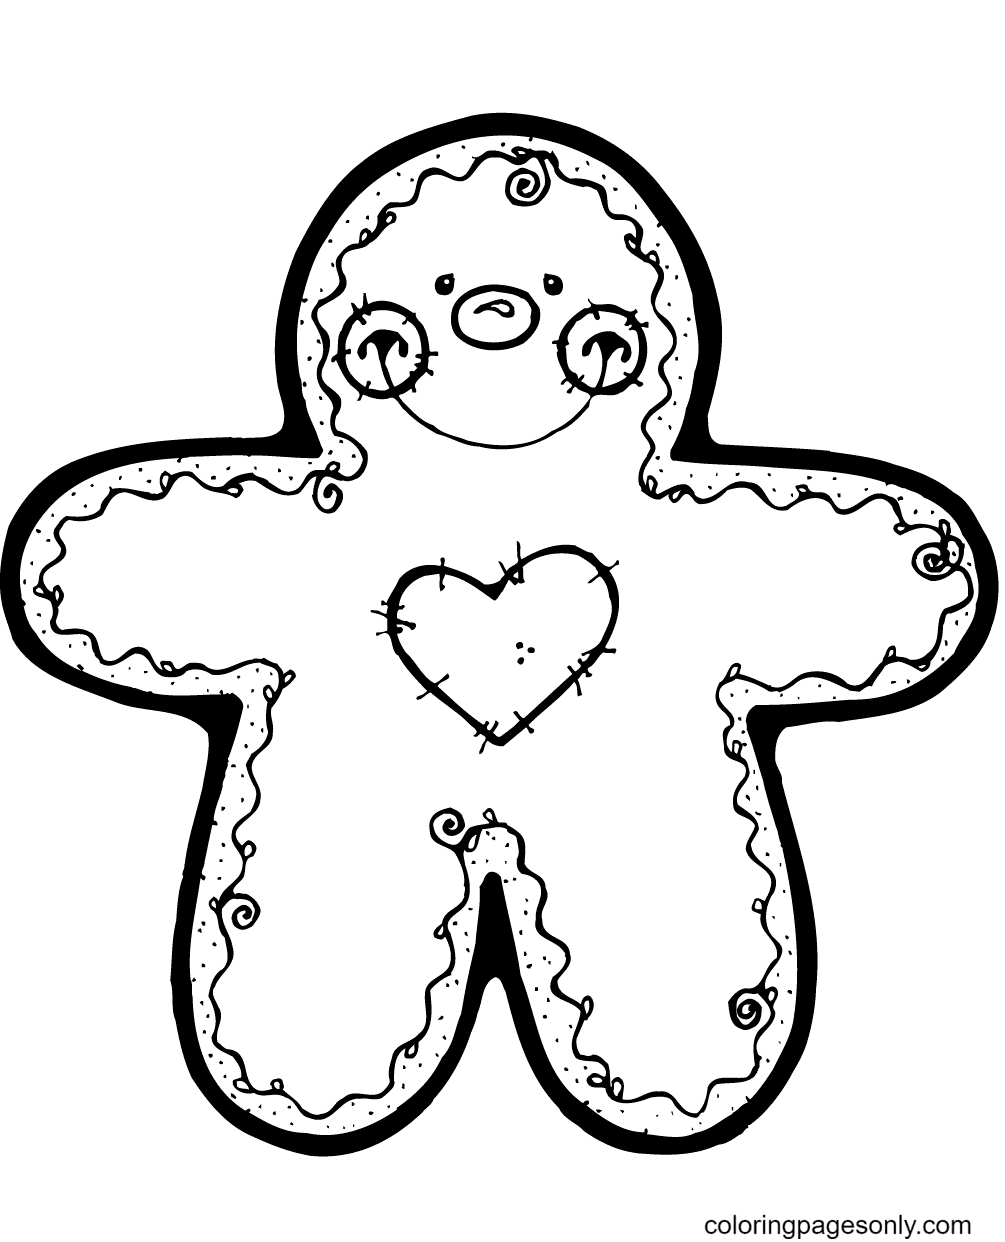 Gingerbread Man With a Heart Full of Thorns Coloring Pages